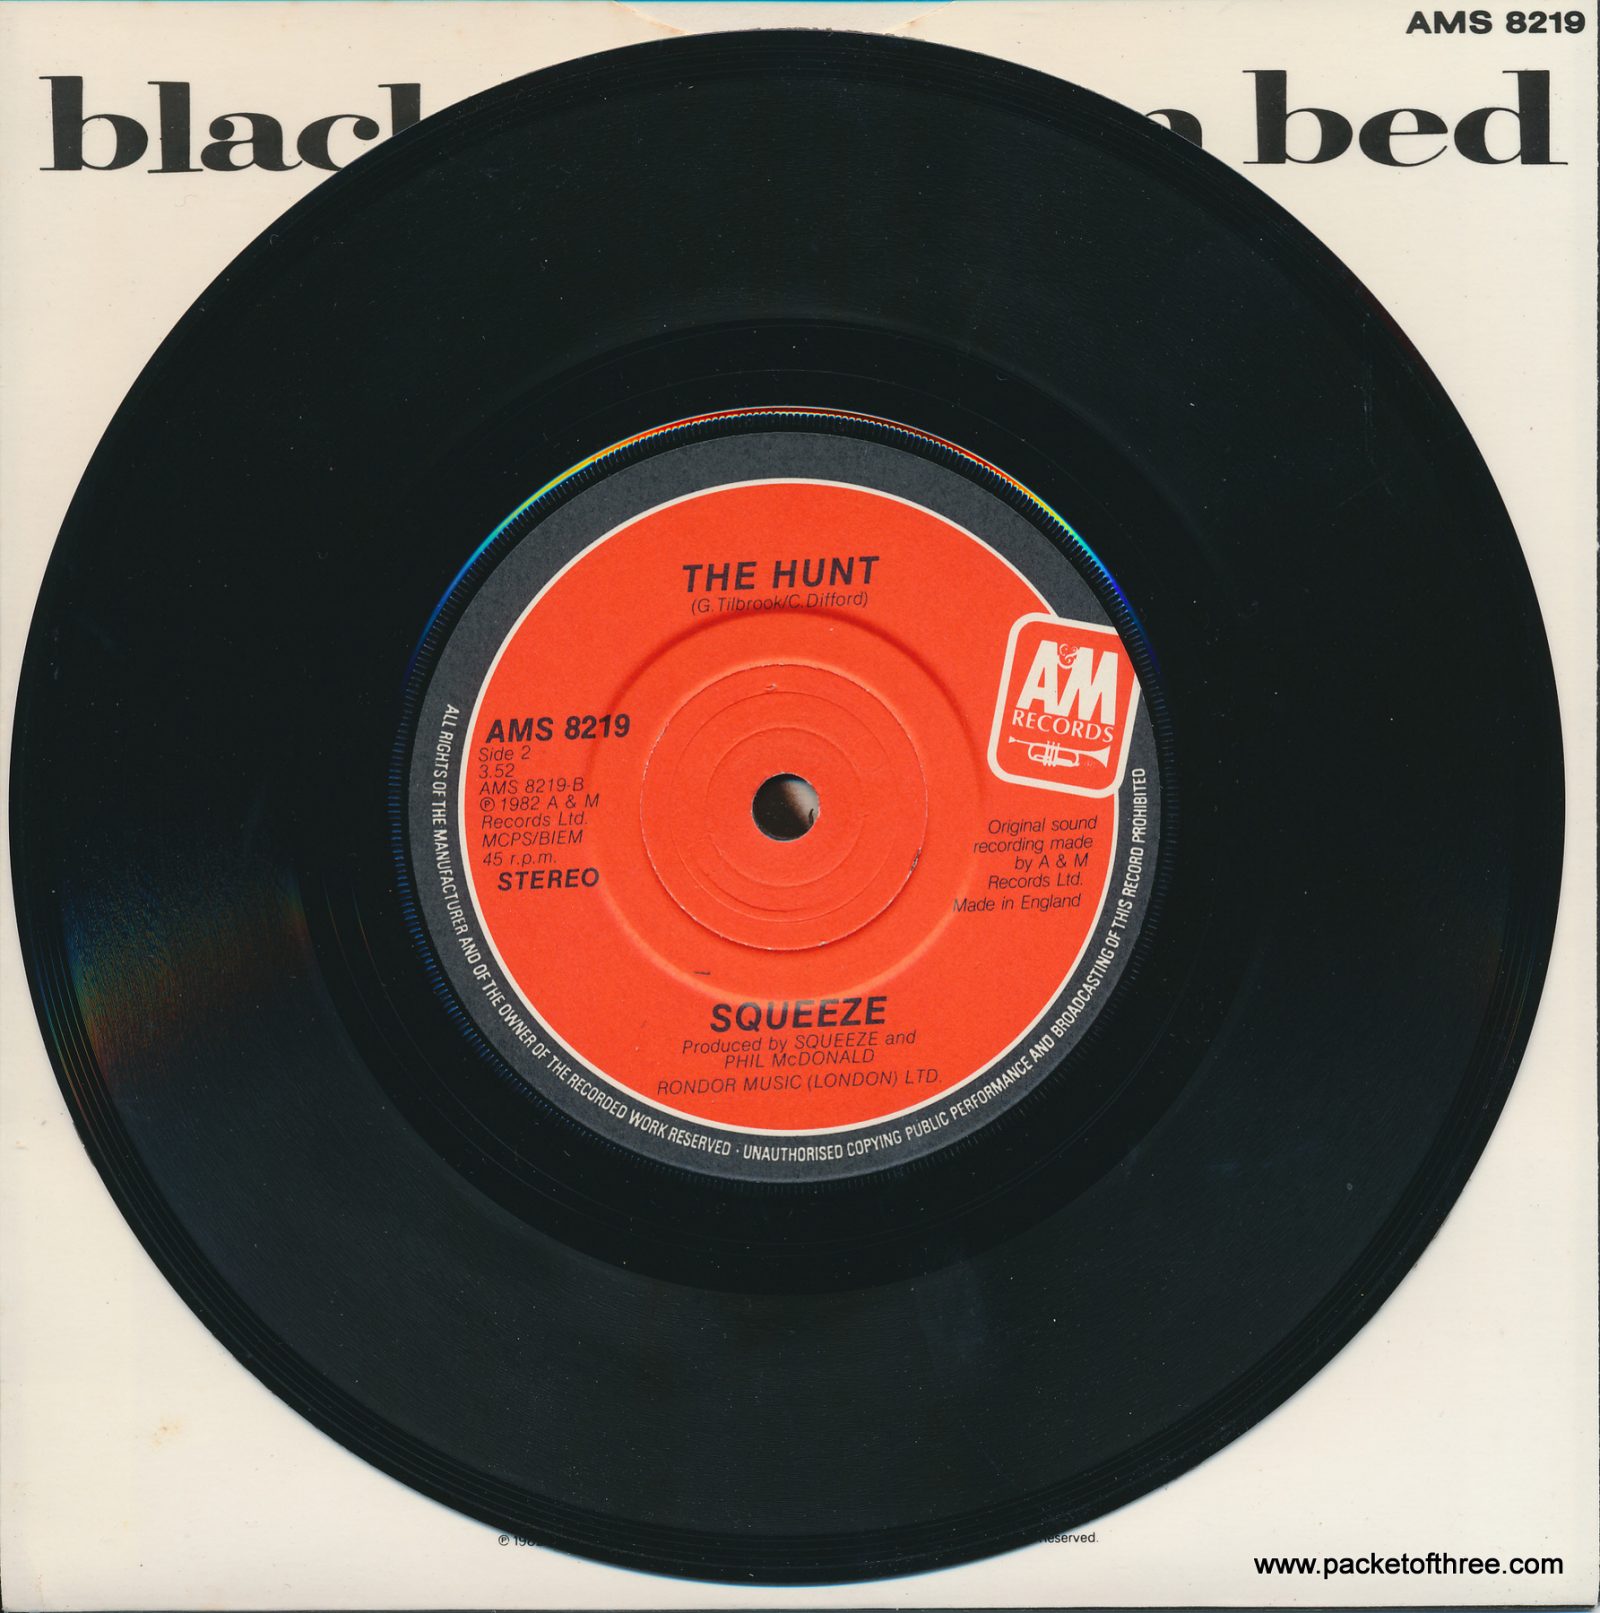 Black Coffee In Bed - UK - 7" - picture sleeve